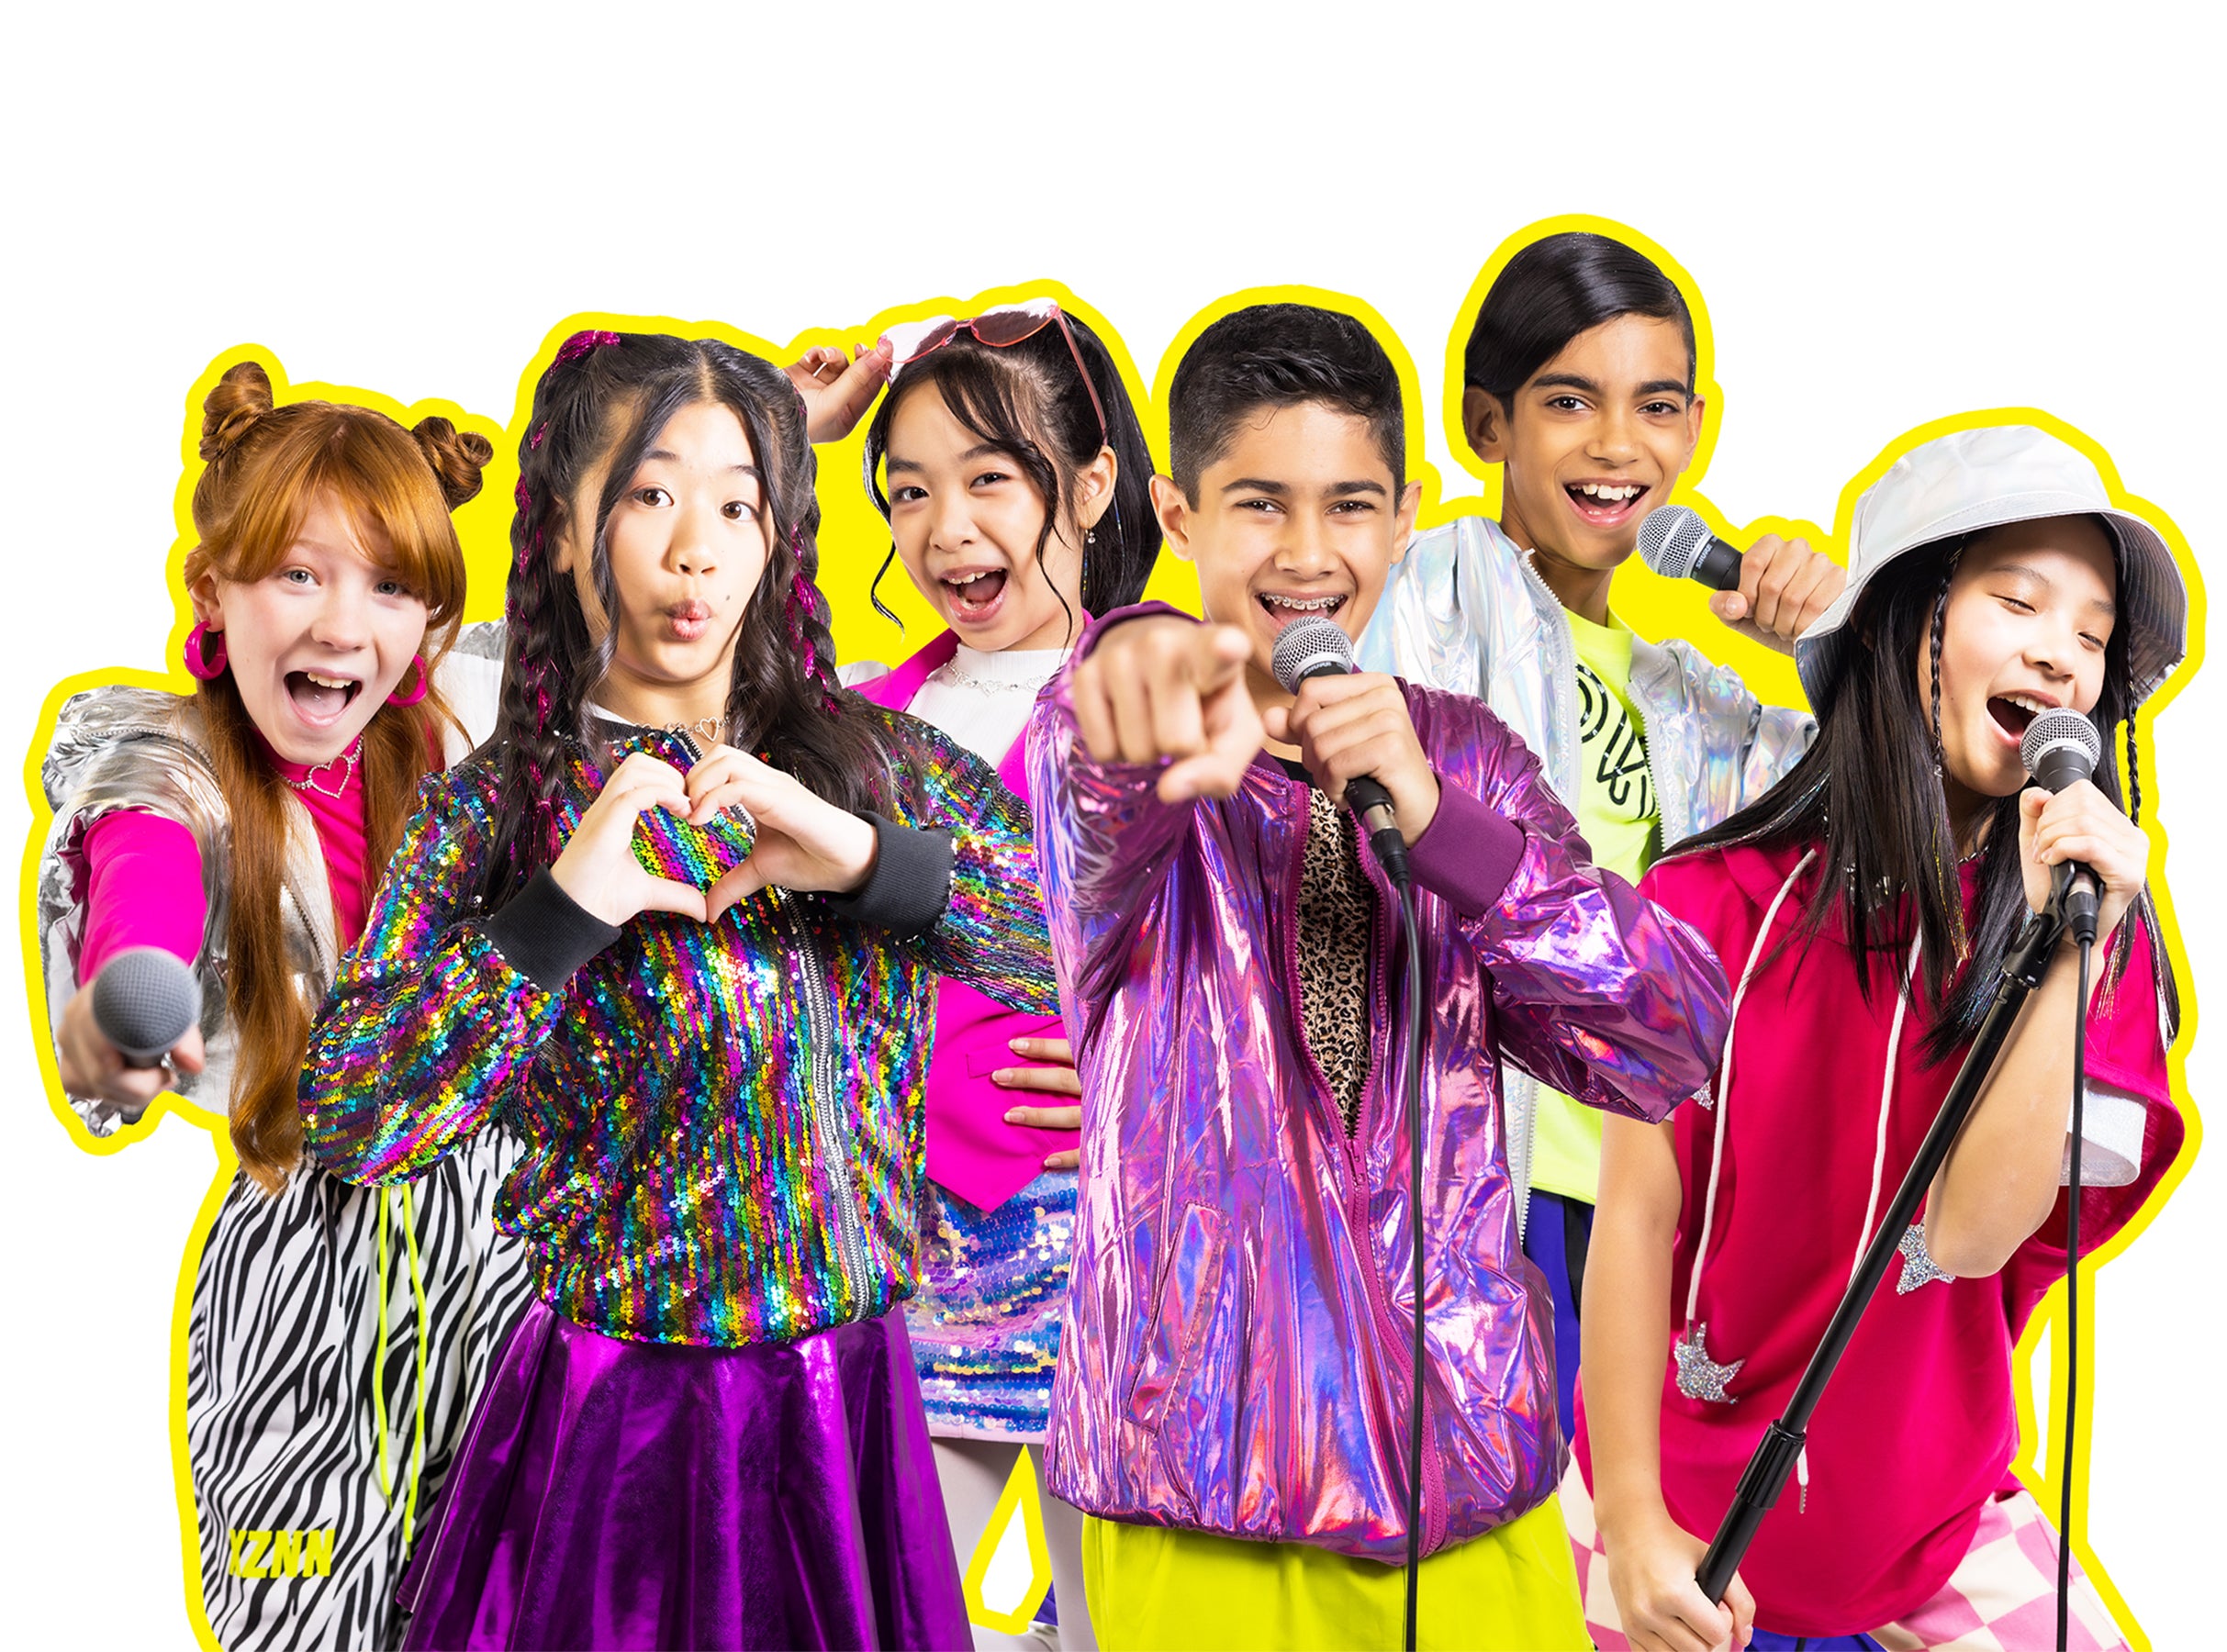 Mini Pop Kids Live - The Good Vibes Tour in Winnipeg promo photo for VIP Package presale offer code